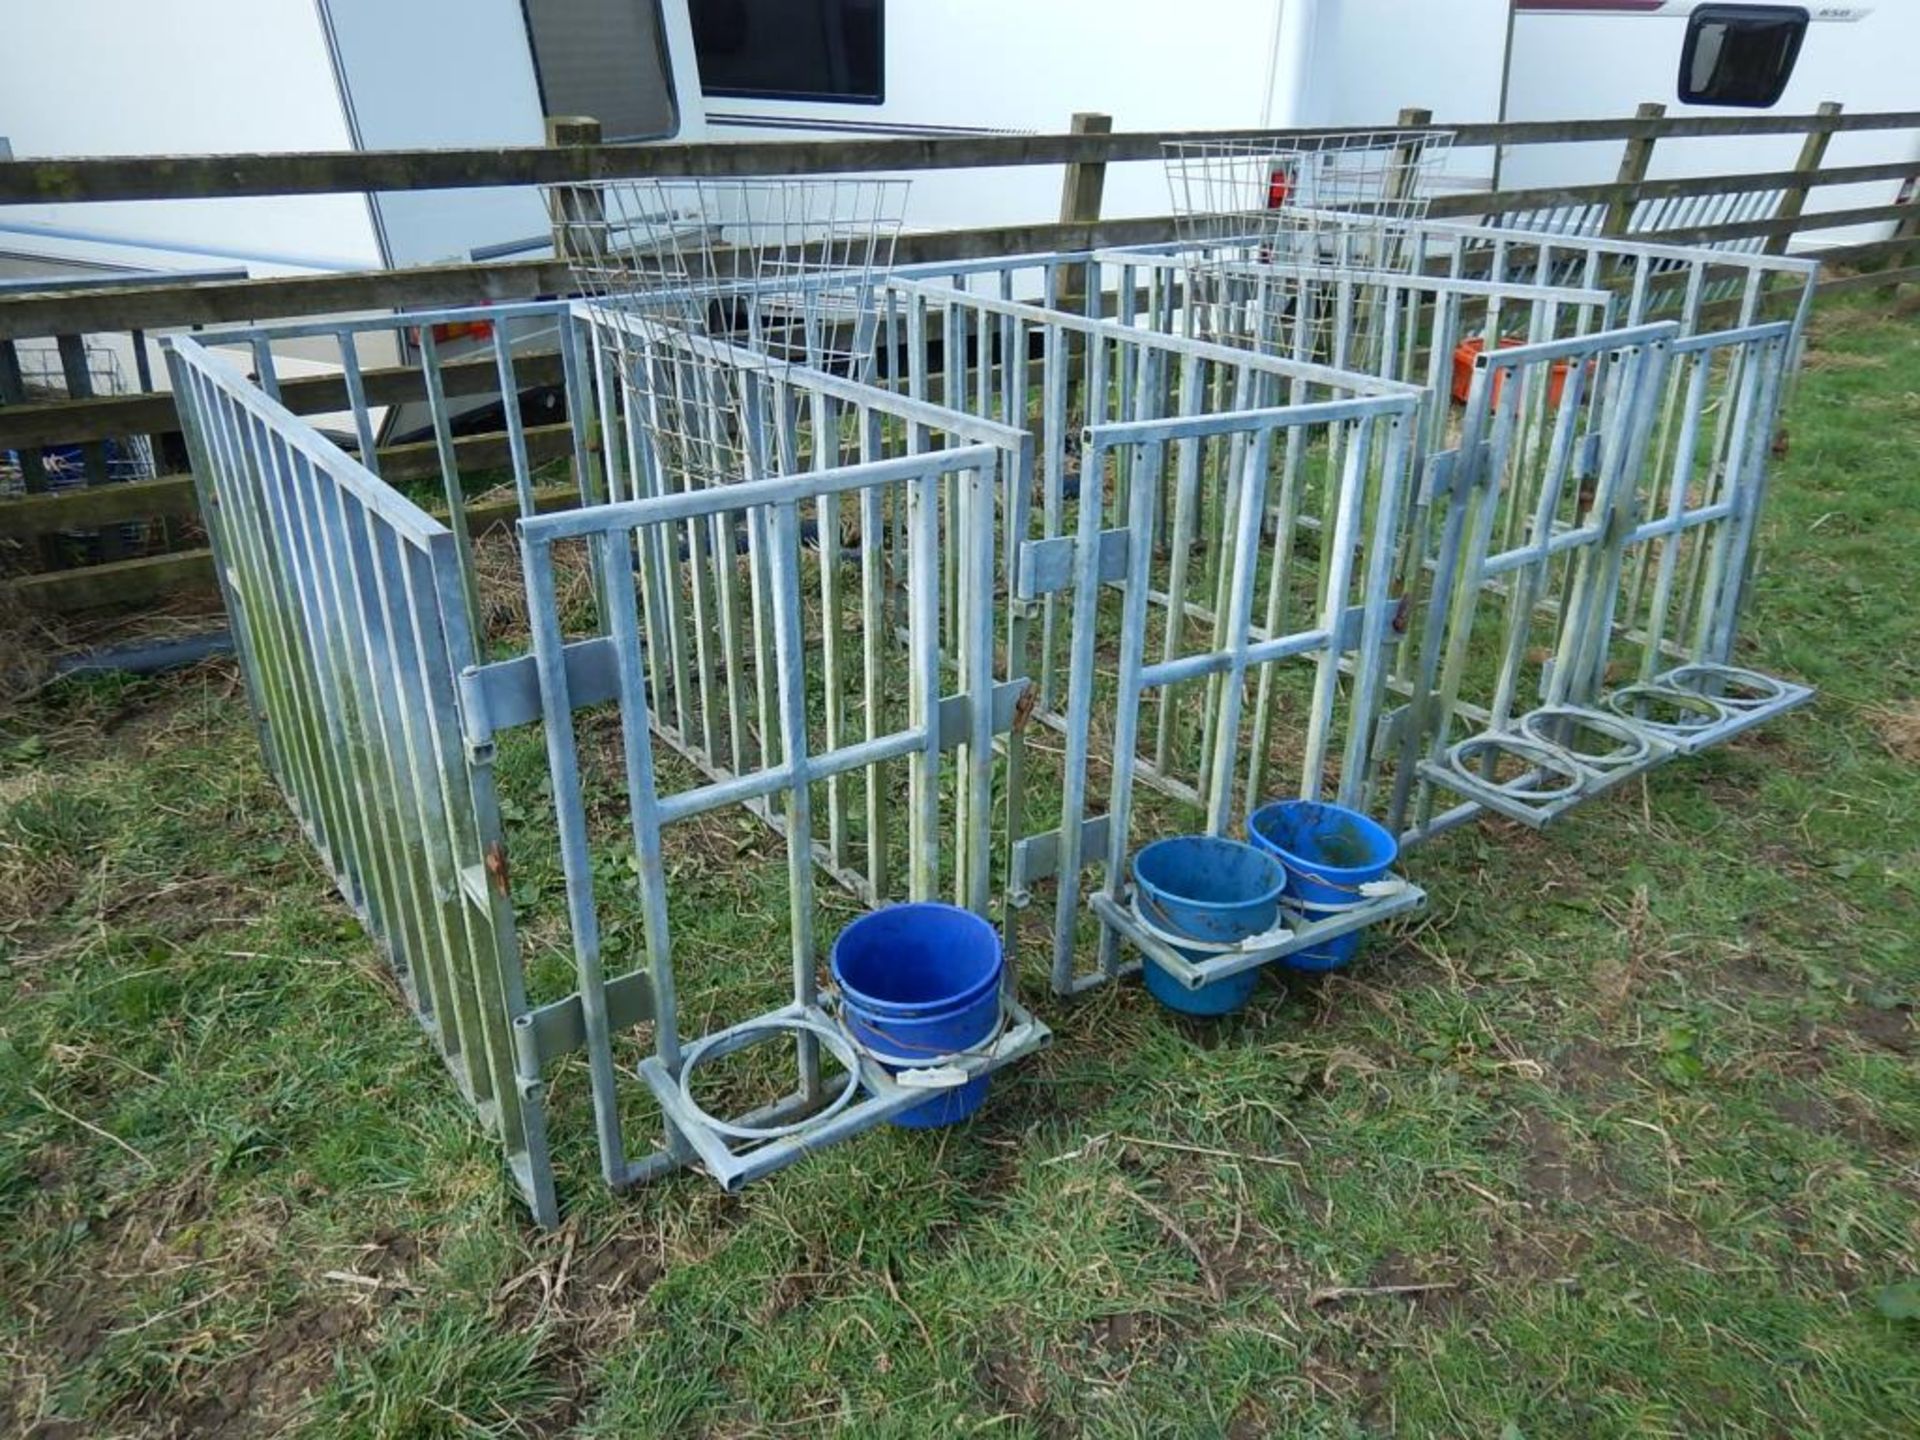 4bay calf feeder pens with mangers and bucket feeder brackets